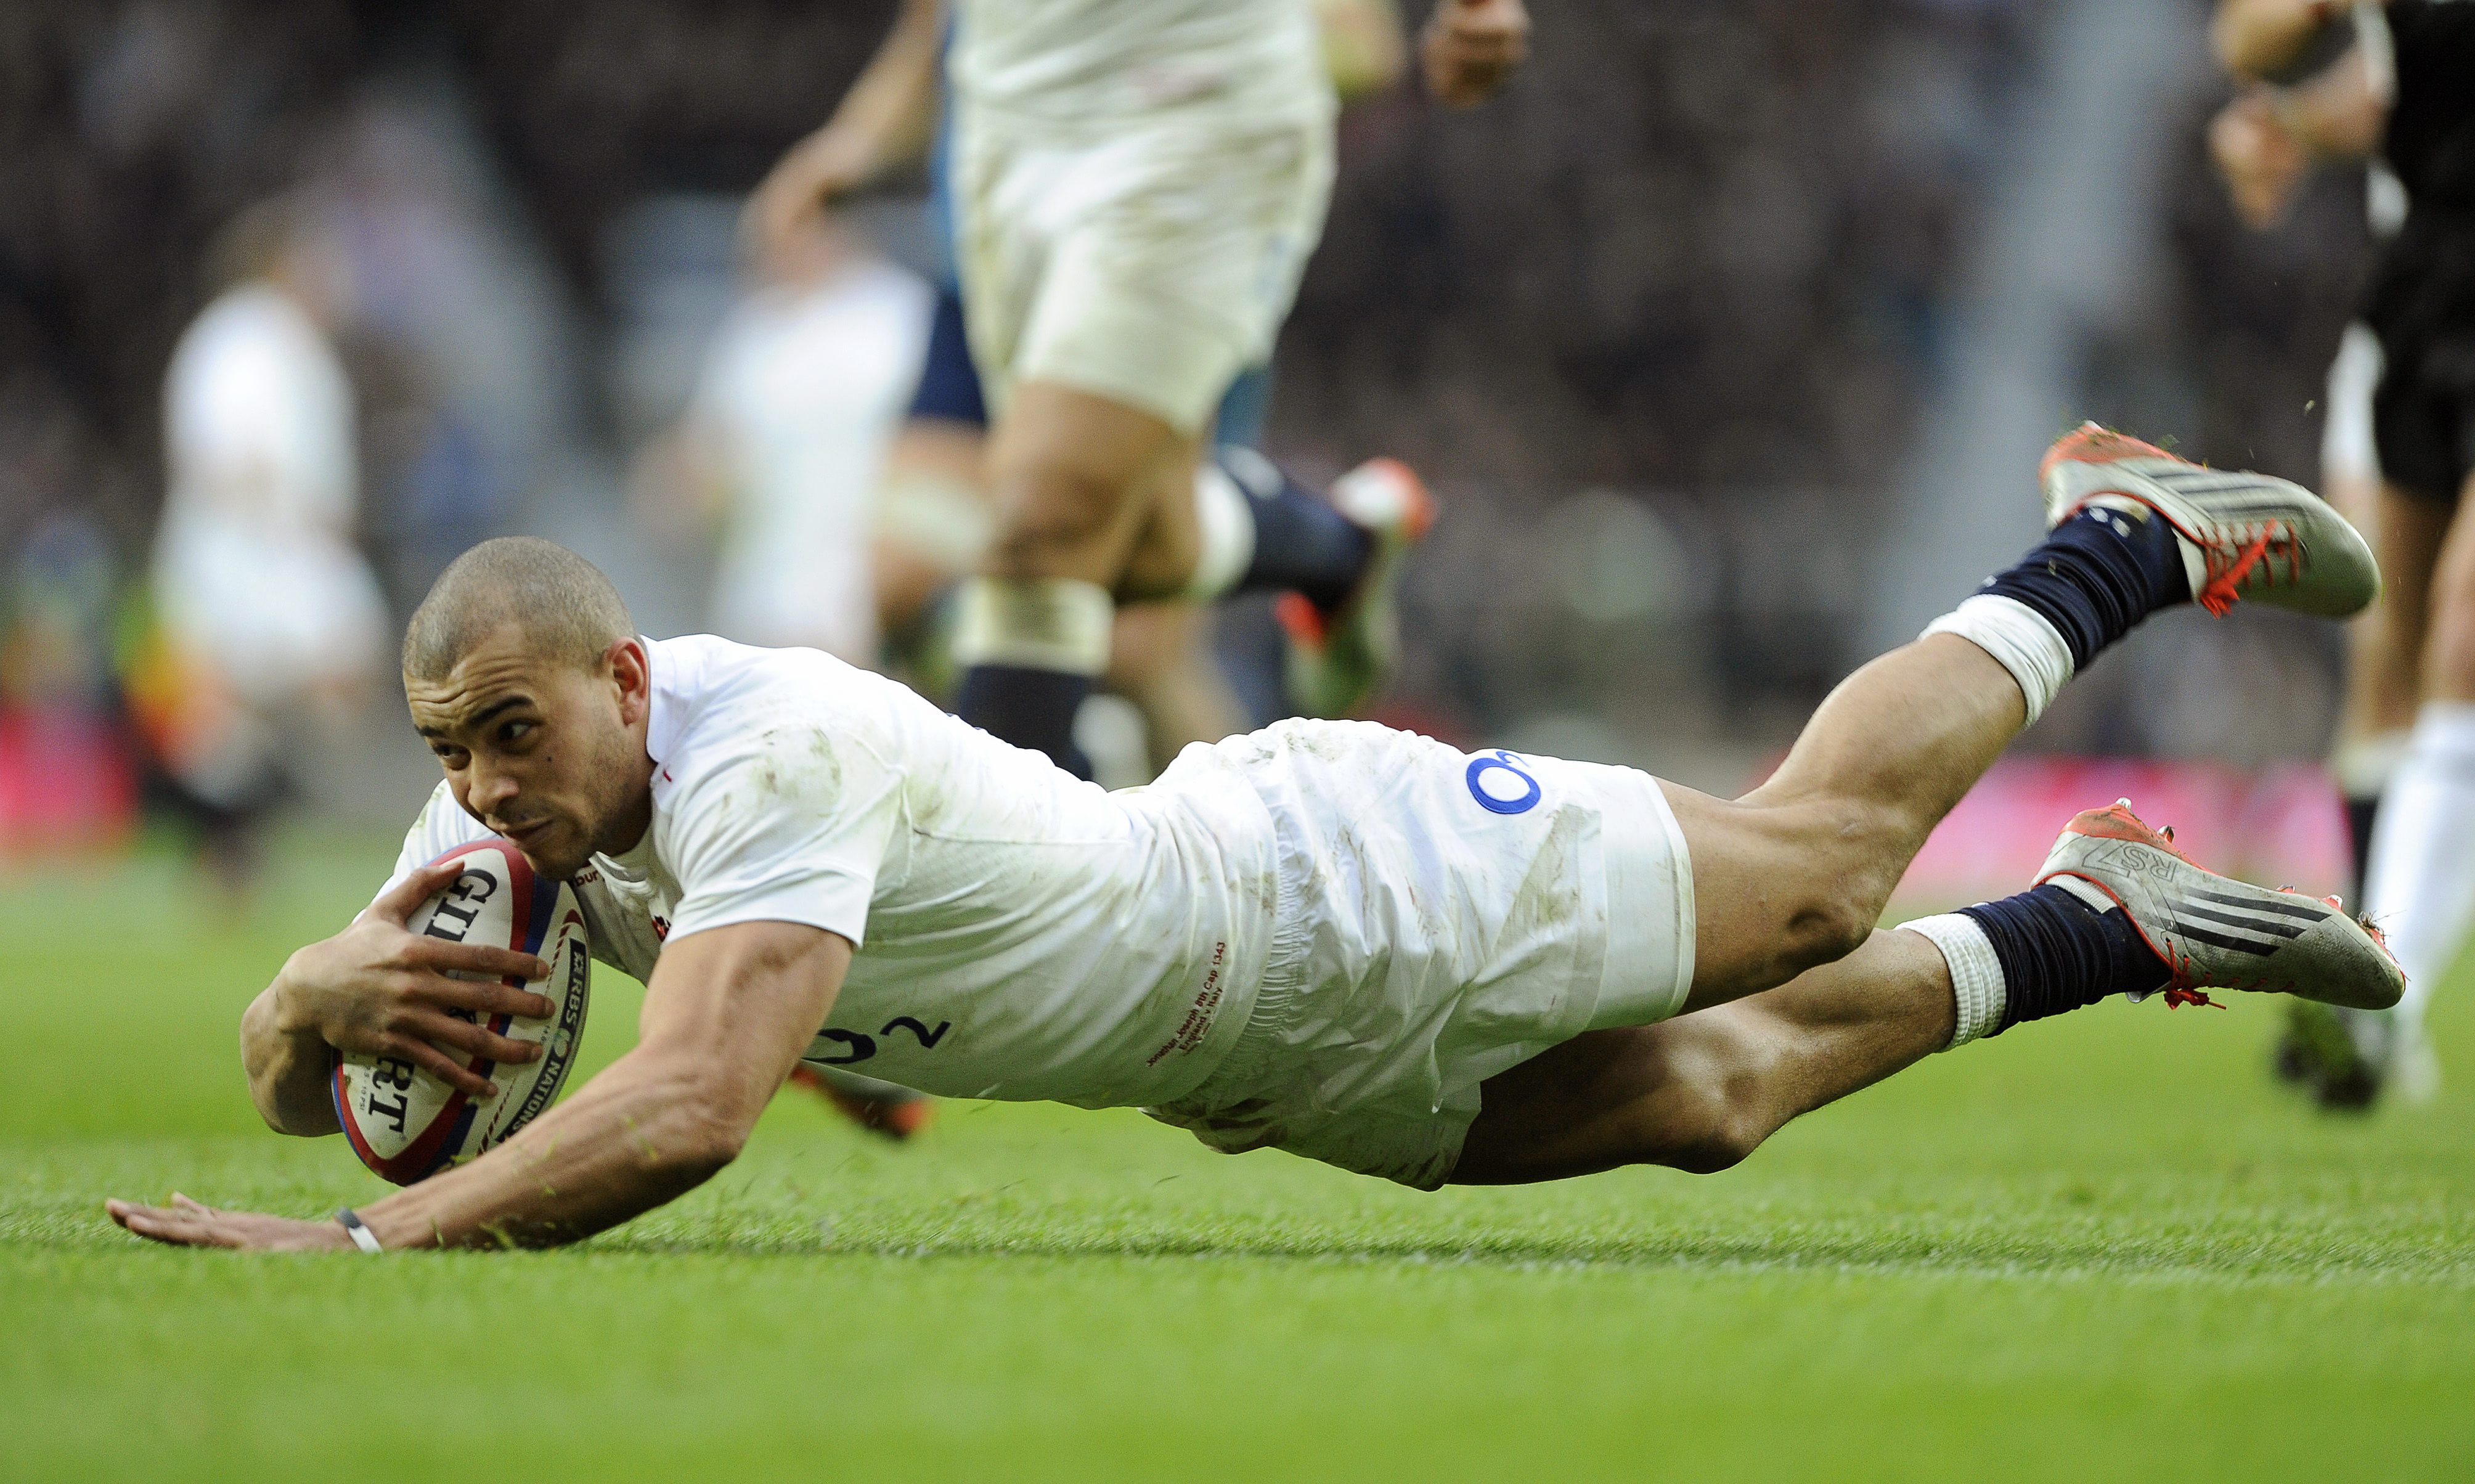 Jonathon Joseph scores one of his two tries in England's Six Nations match against Italy at Twickenham on Saturday. England won 47-17. Photo: EPA